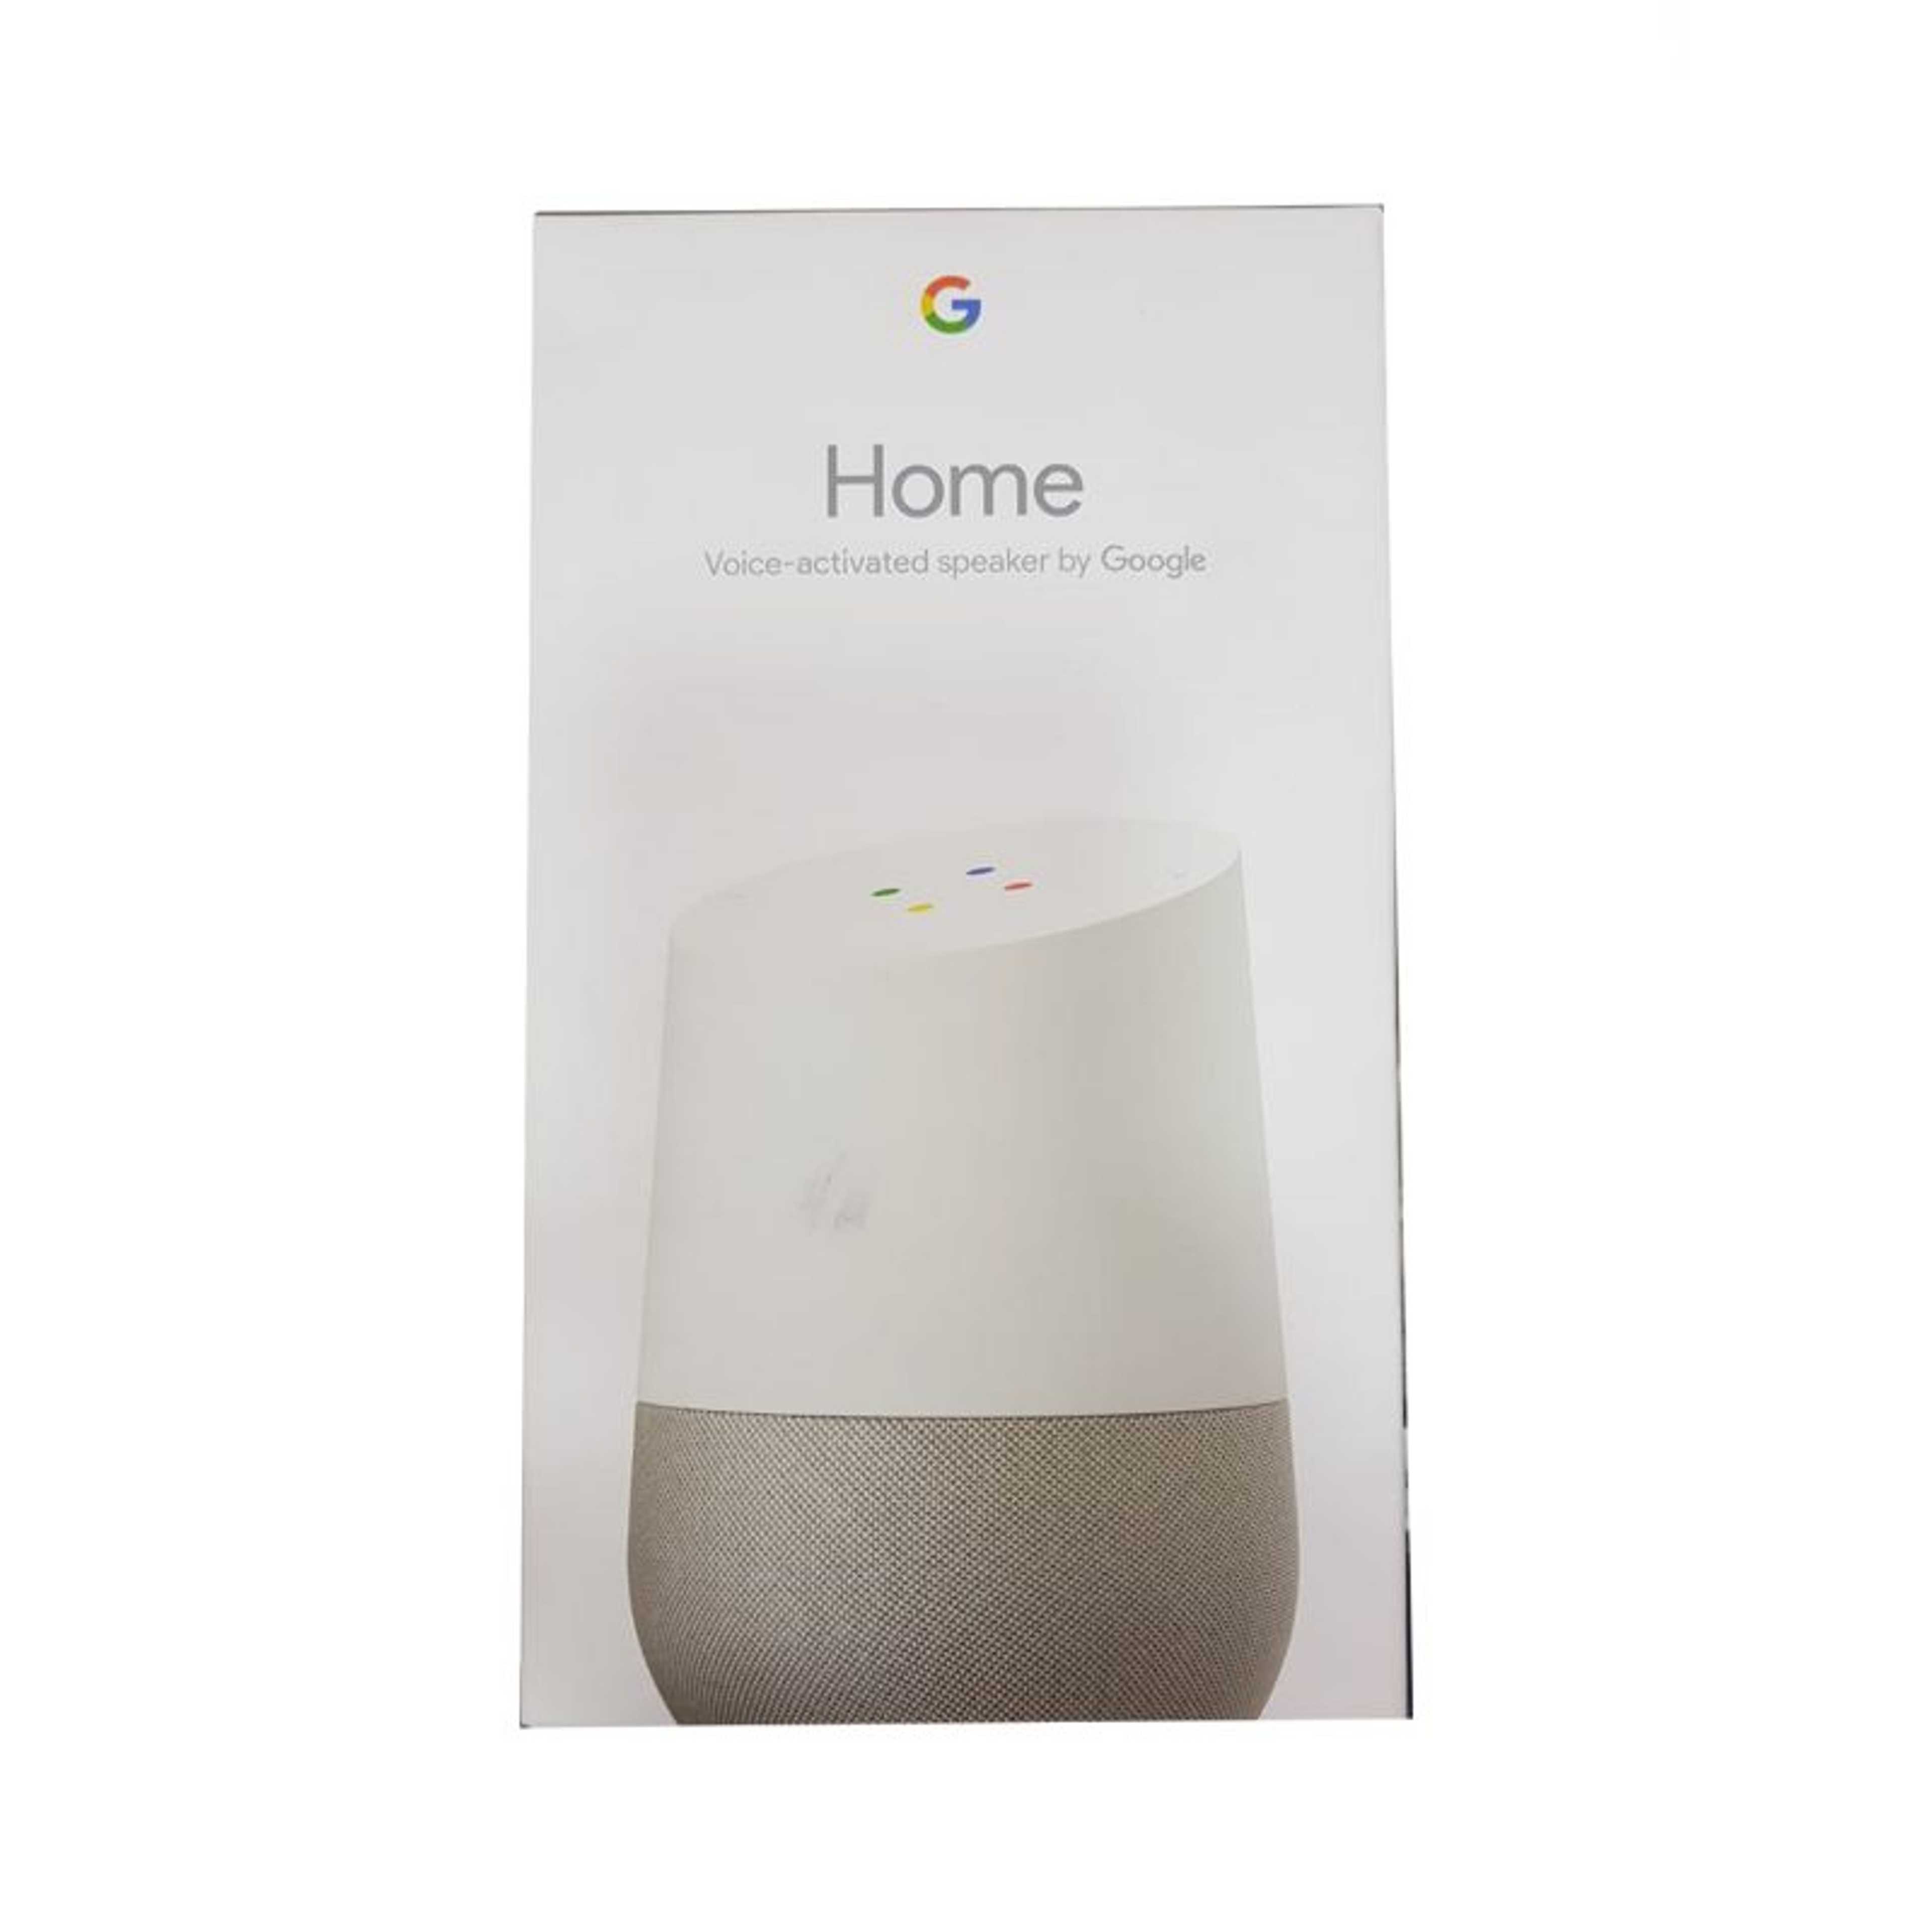 Google Home Voice-activated speaker by Google